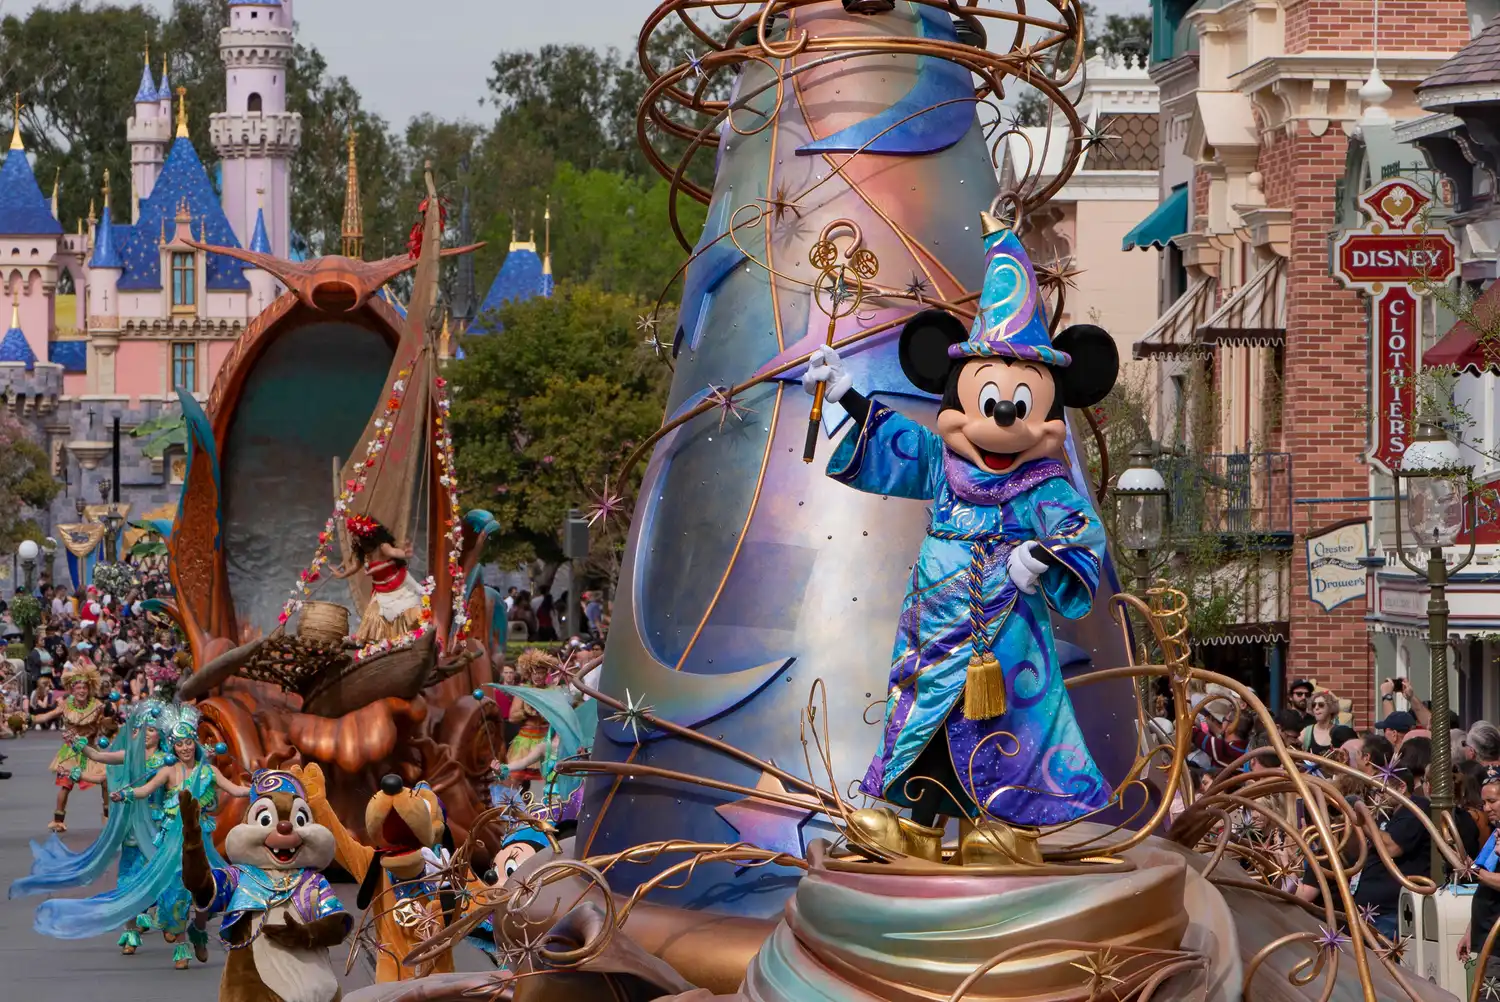 Magic Happens Mickey Disneyland Parade. Keep reading to know what to wear to Disneyland in March.